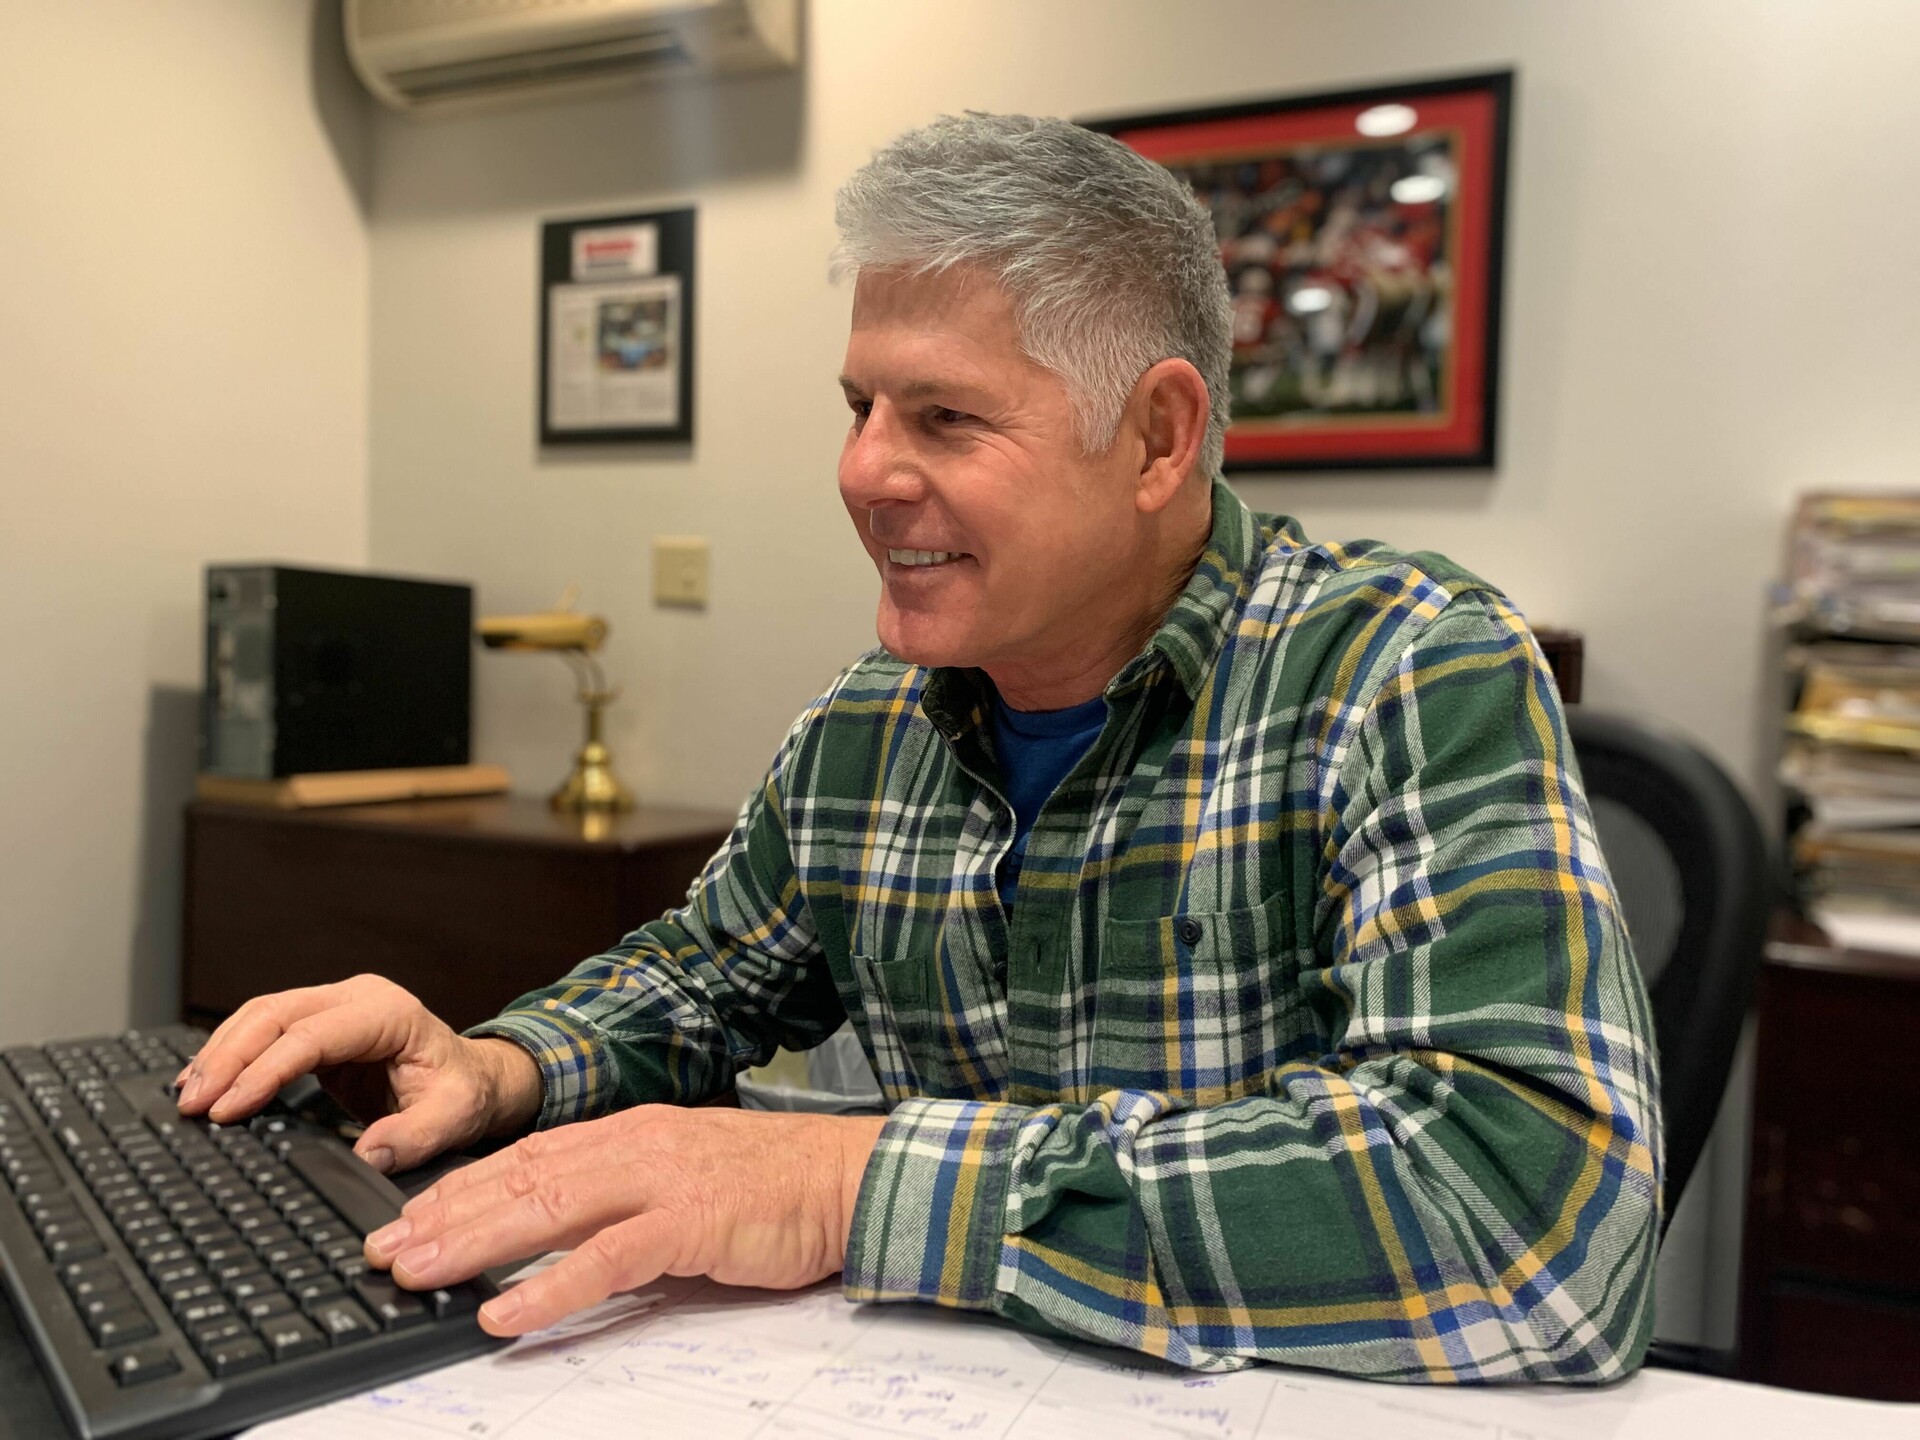 A middle-aged white man in a green plaid shirt sits smiling at a desk typing on a computer keyboard.